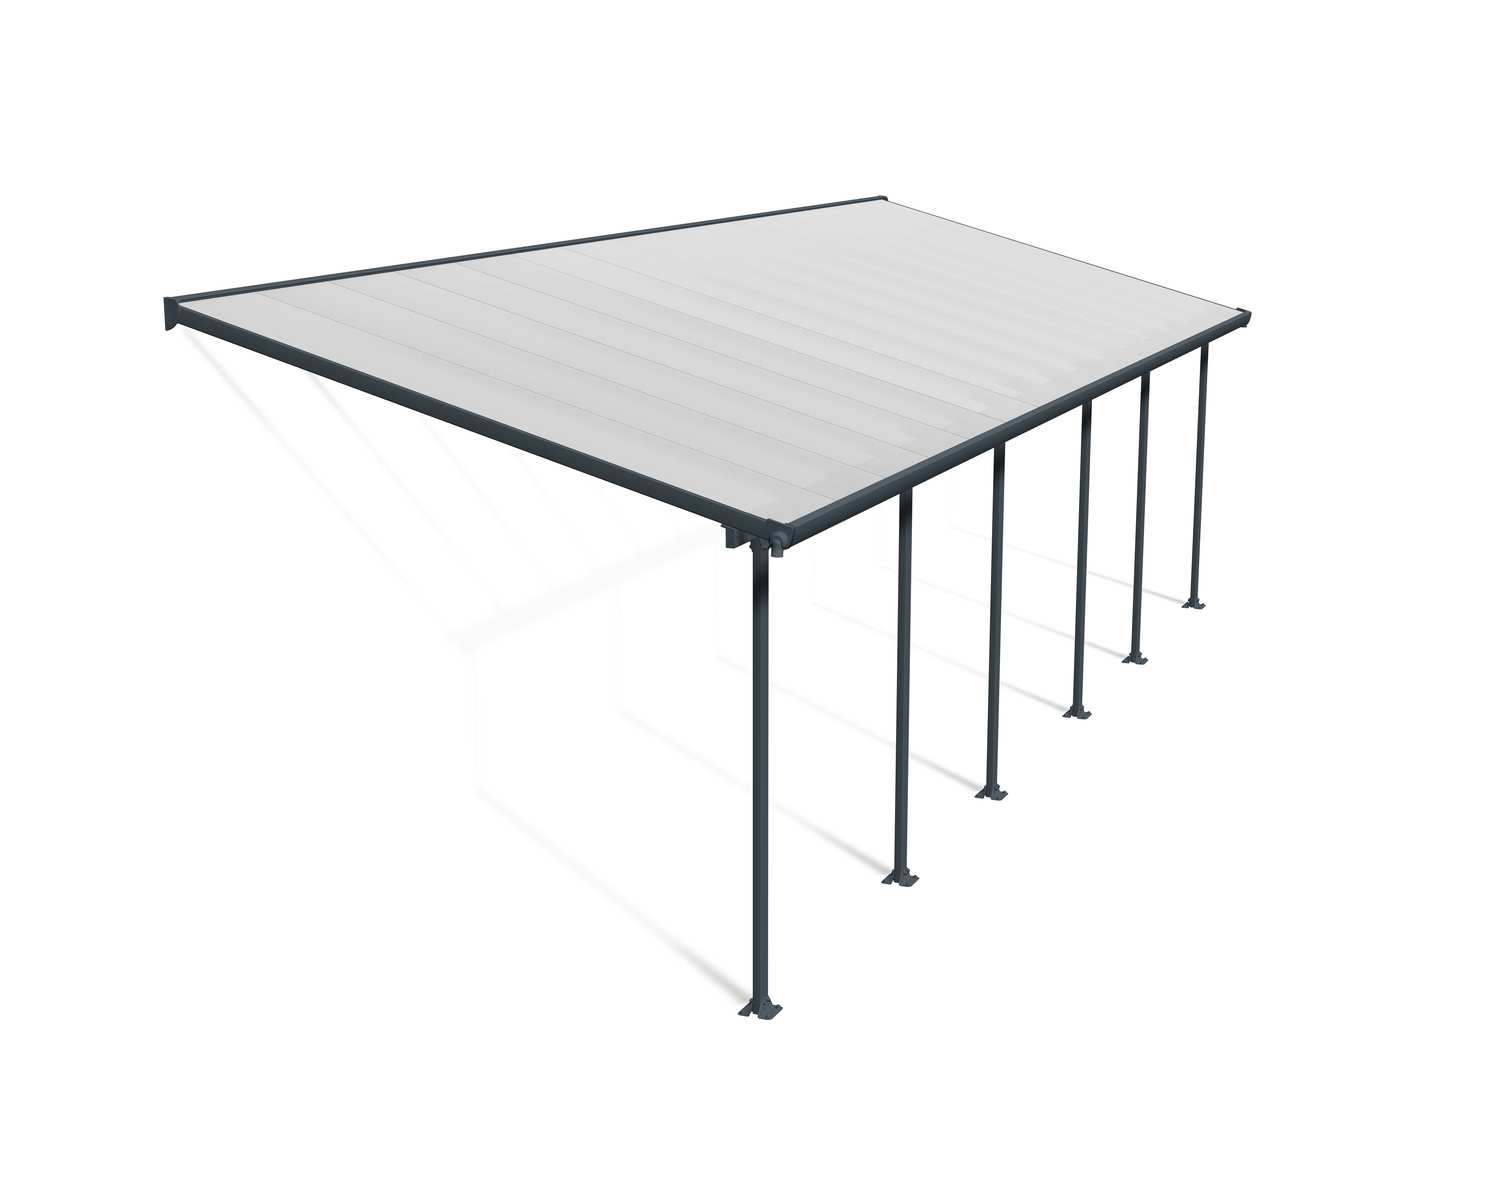 Feria 10 ft. x 30 ft. Grey Aluminium Patio Cover With 6 Posts, Clear Twin-Wall Polycarbonate Roof Panels.